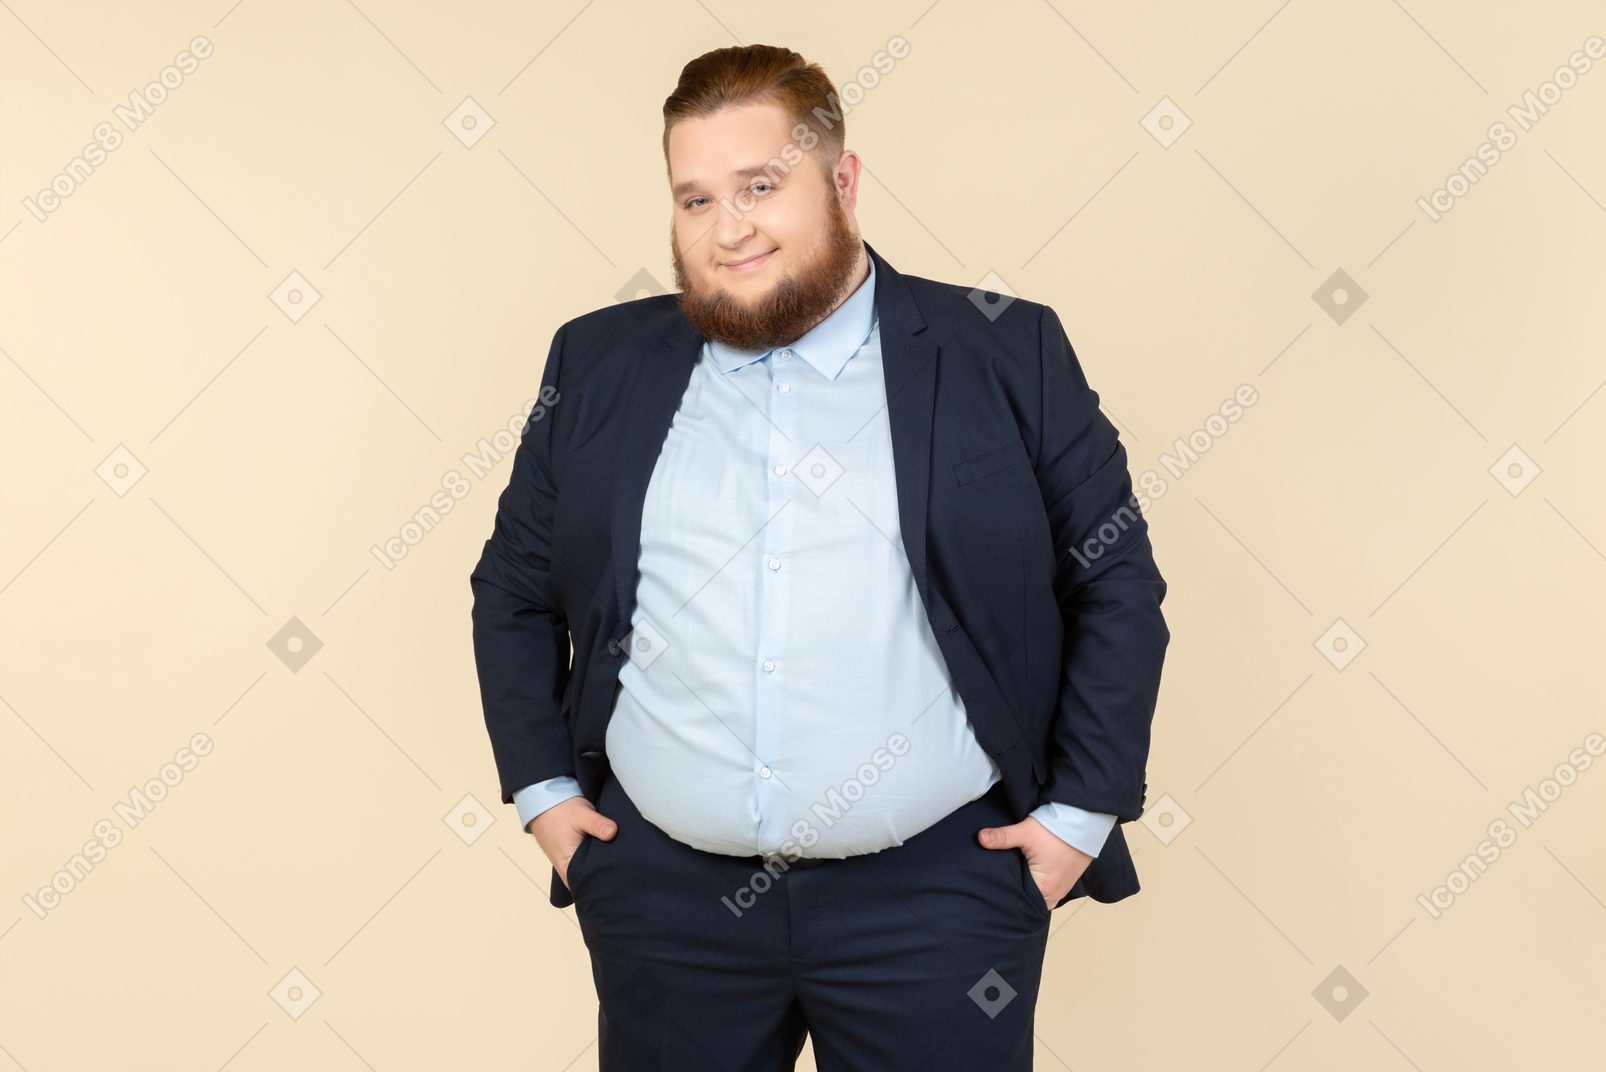 Happy looking young overweight man standing with hands in pockets